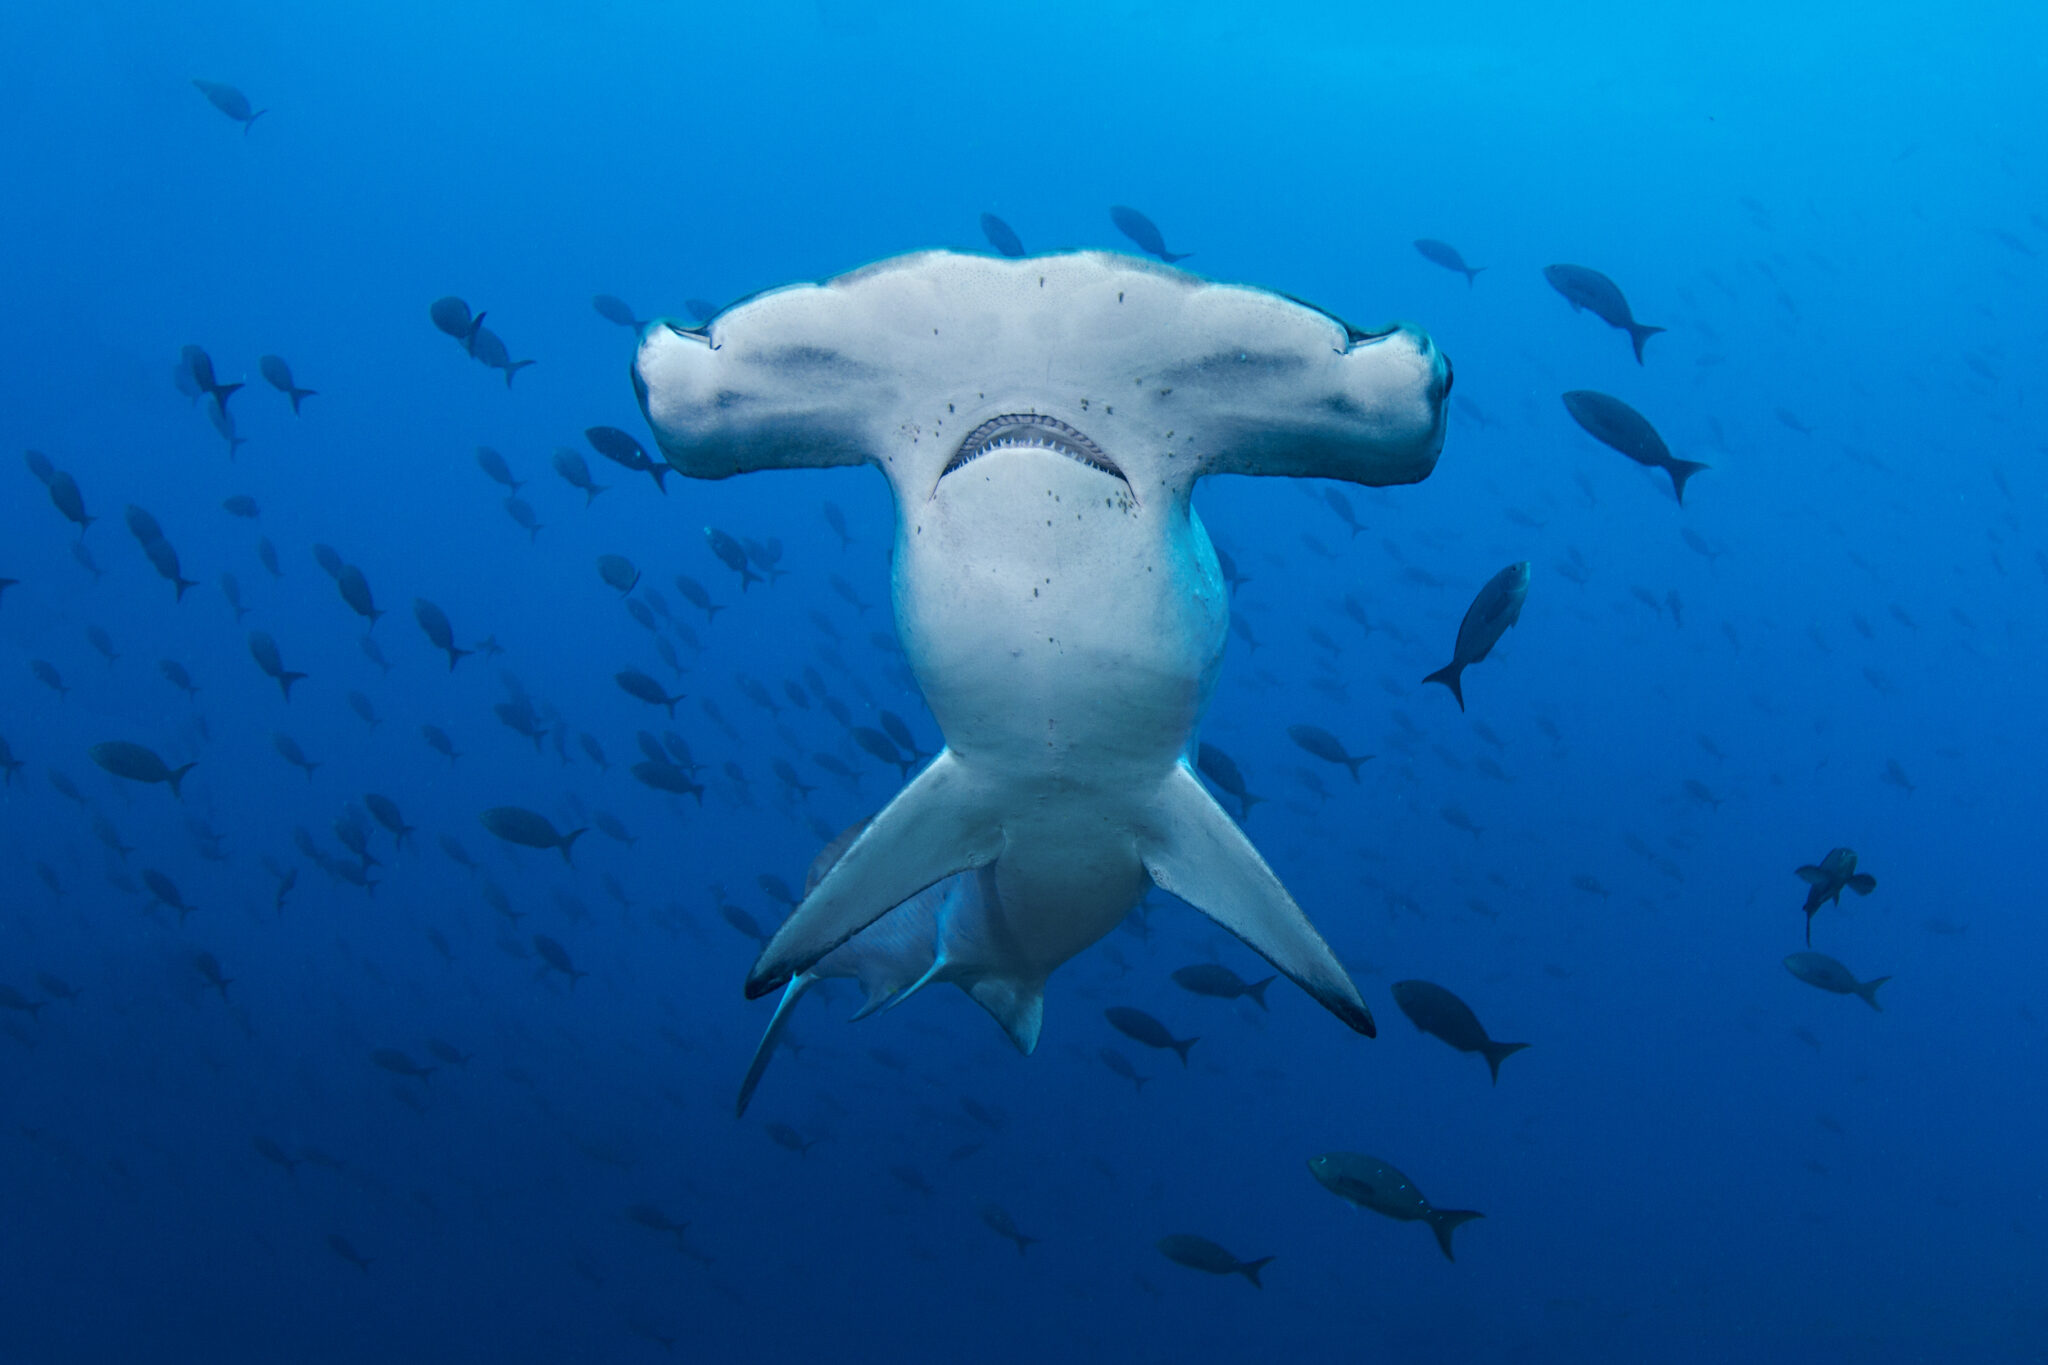 A hammerhead shark approaching the camera and a top marine life encounter while enjoying Red Sea liveaboard diving packages